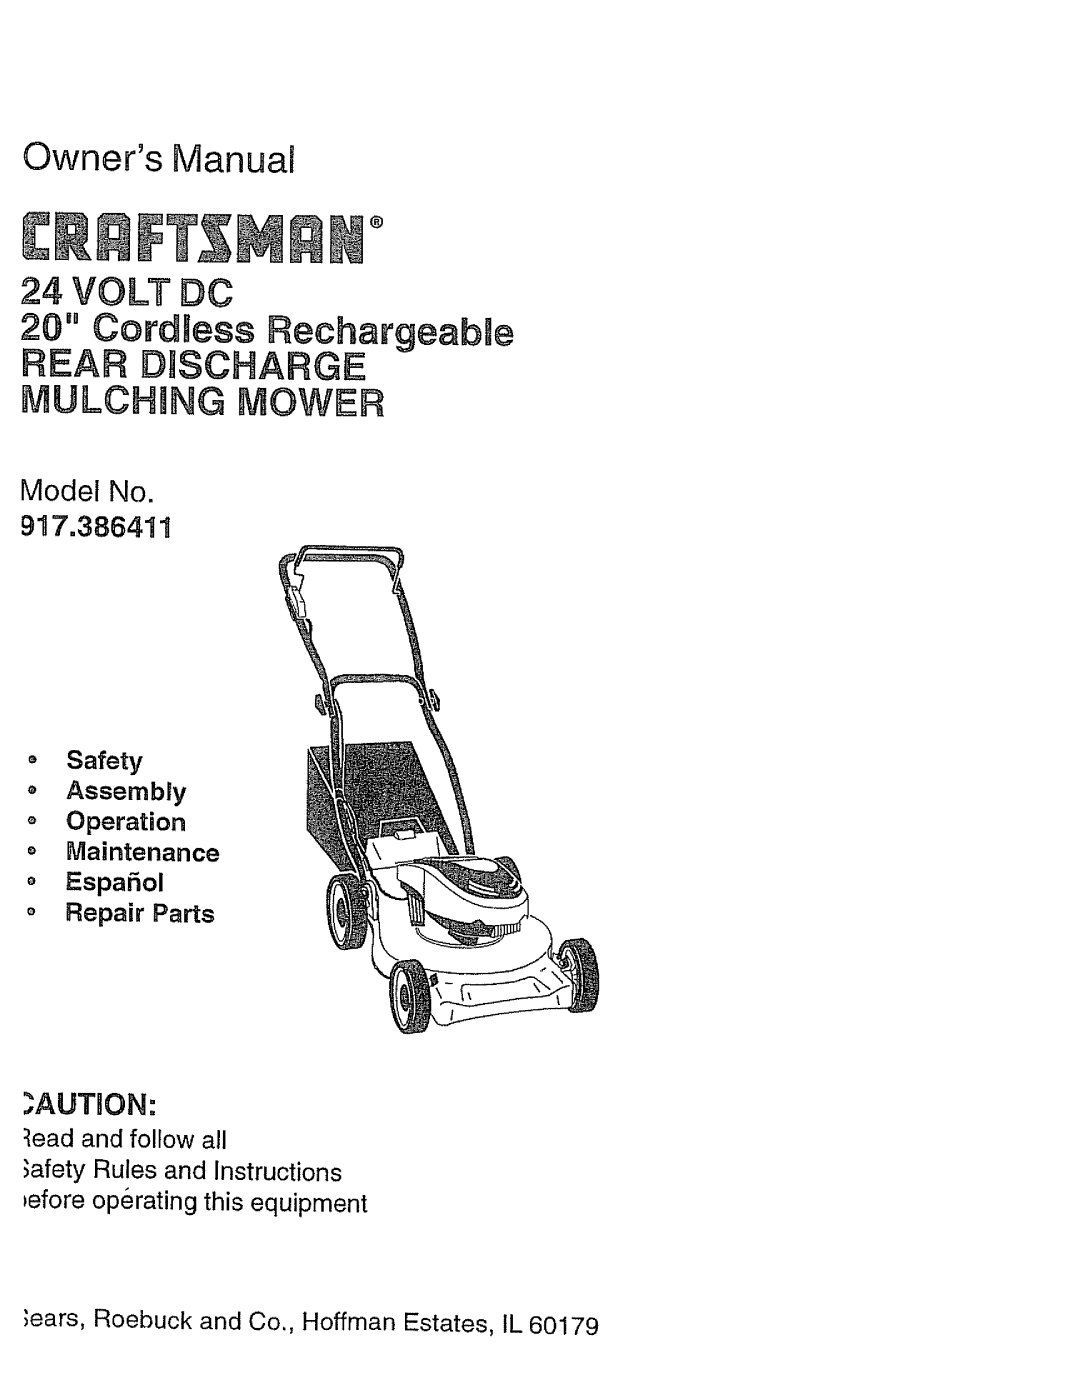 Craftsman 917.386411 manual Aution, Model No, •Assembly Operation, o EspaSol, _efore operating this equipment, Safety 